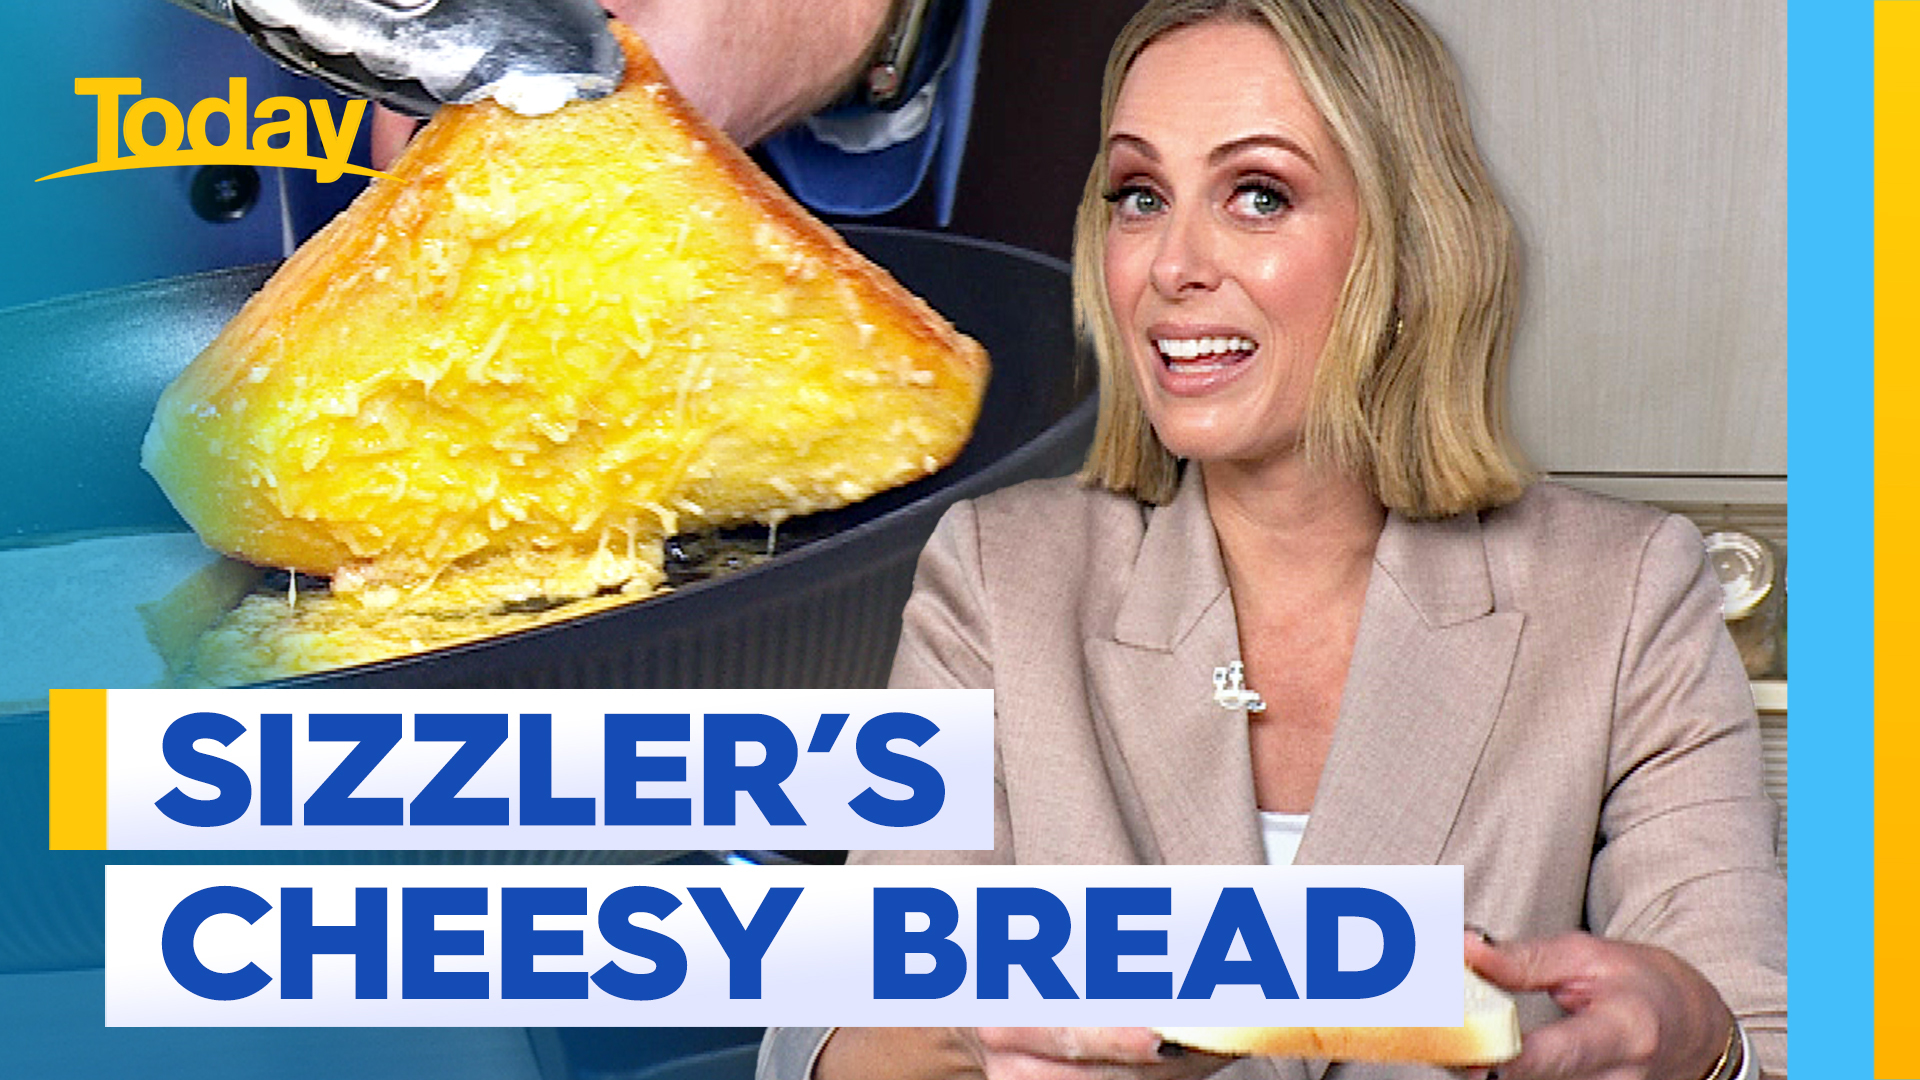 Sylvia and DC attempt Sizzler's iconic cheesy bread